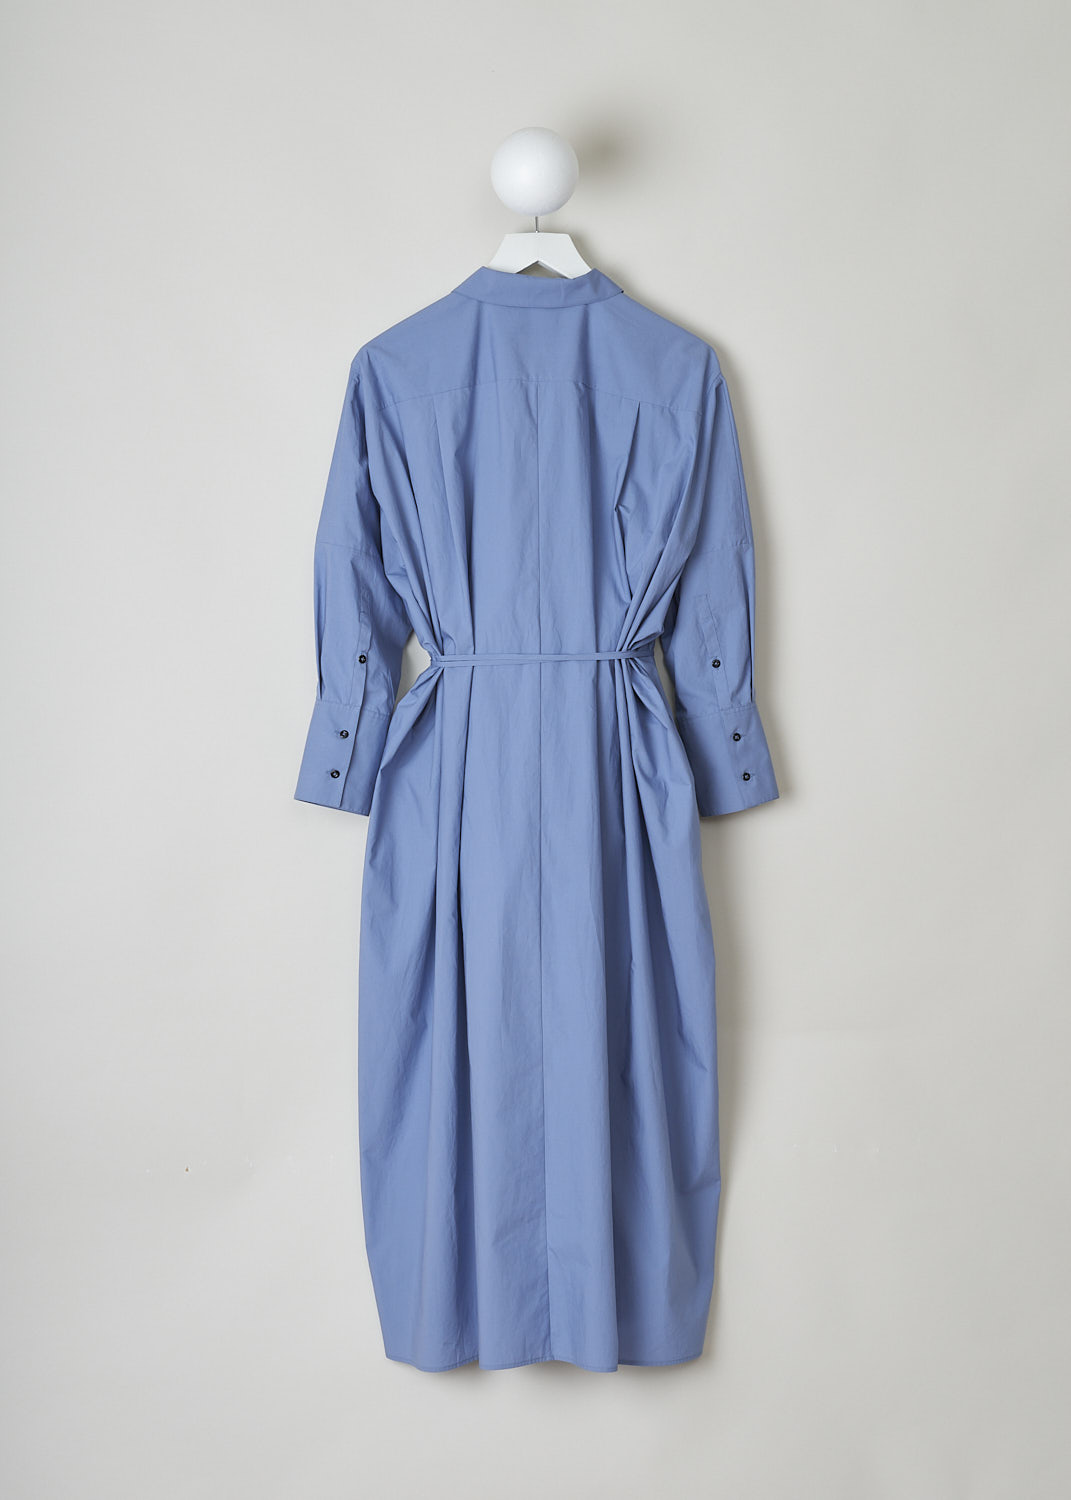 JIL SANDER, BLUE MIDI SHIRT DRESS WITH WAIST TIE, JSPO500806_WO242000_450, Blue, Back, This blue midi shirt dress has a spread collar with a straight neckline. The dress has a concealed front button closure with a single black button visible. The dress has three quarter sleeves with buttoned cuffs. The A-line silhouette can be cinched in with ties. Slanted pockets are concealed in the side seams. The dress has an asymmetrical finish, meaning the back is longer than the front.
